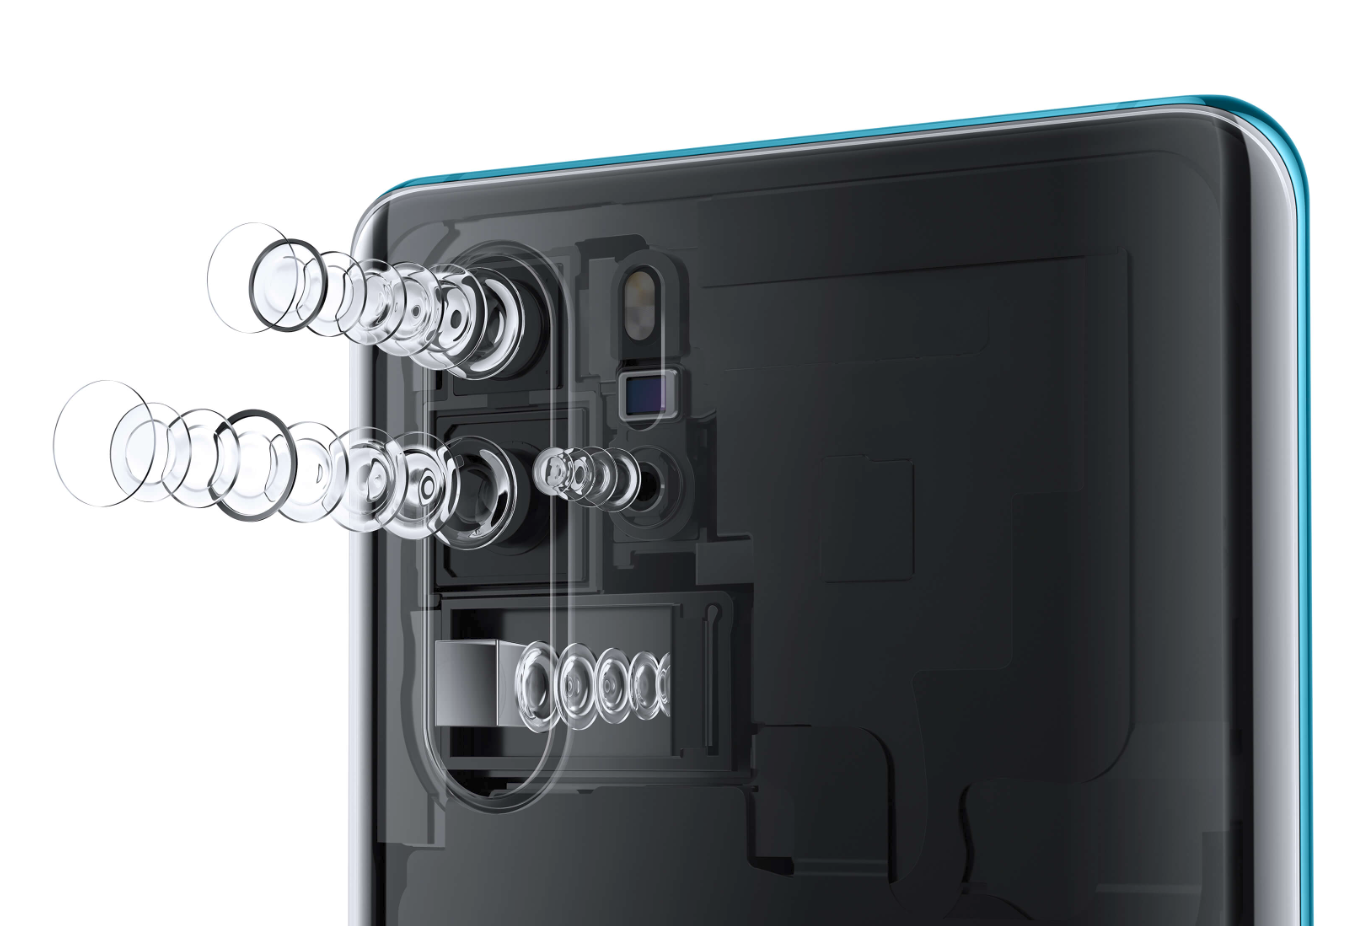 The Huawei P30 Pro smartphone camera sees color differently to capture more light